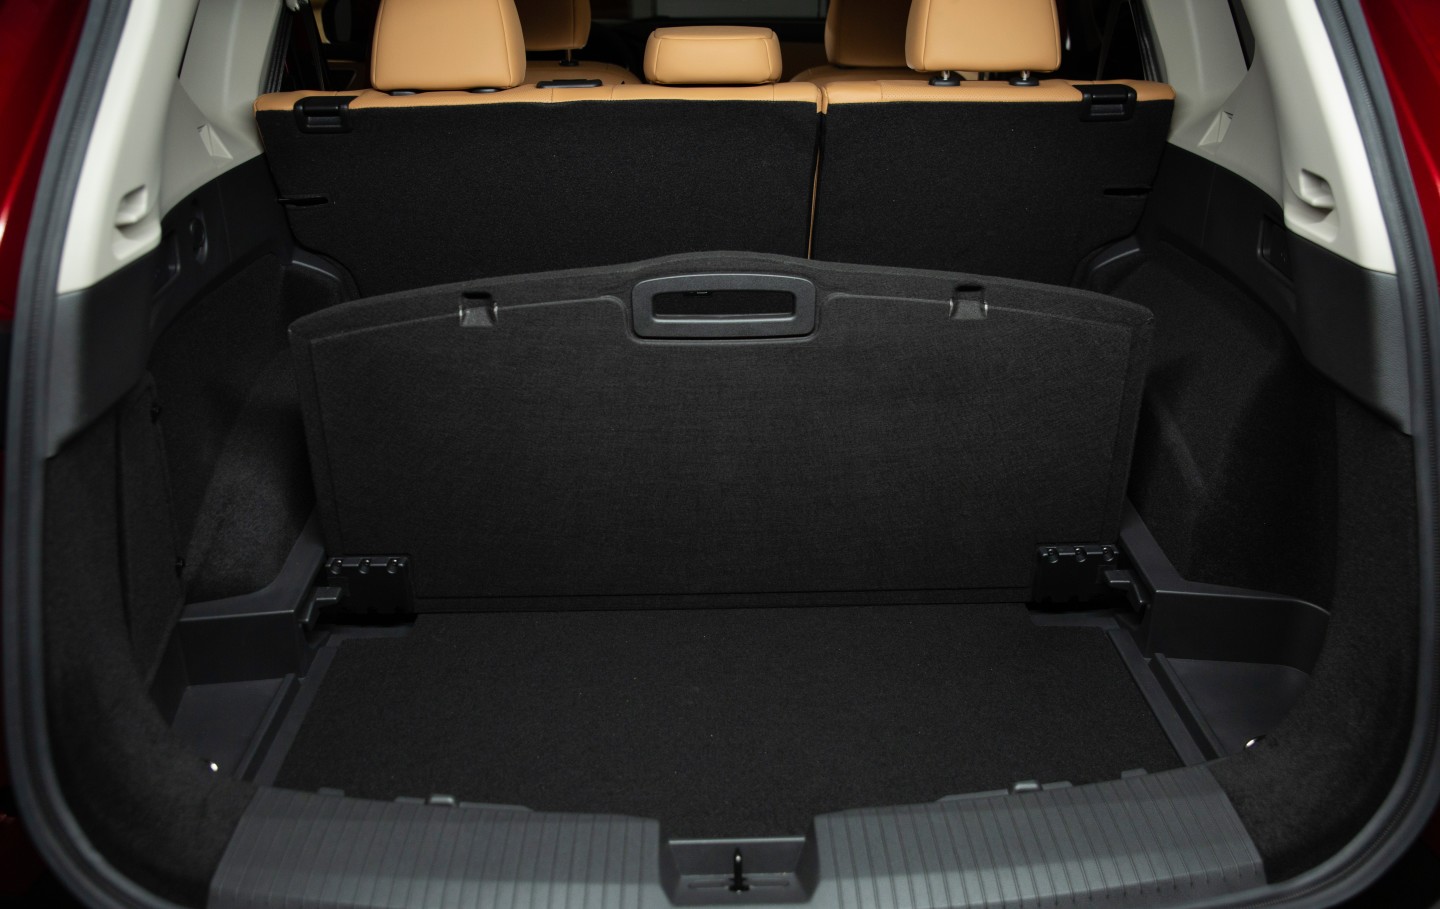 Cargo space in the 2021 Rogue is very well done, with adjustable spacers and shelves (shown) for organization on the fly